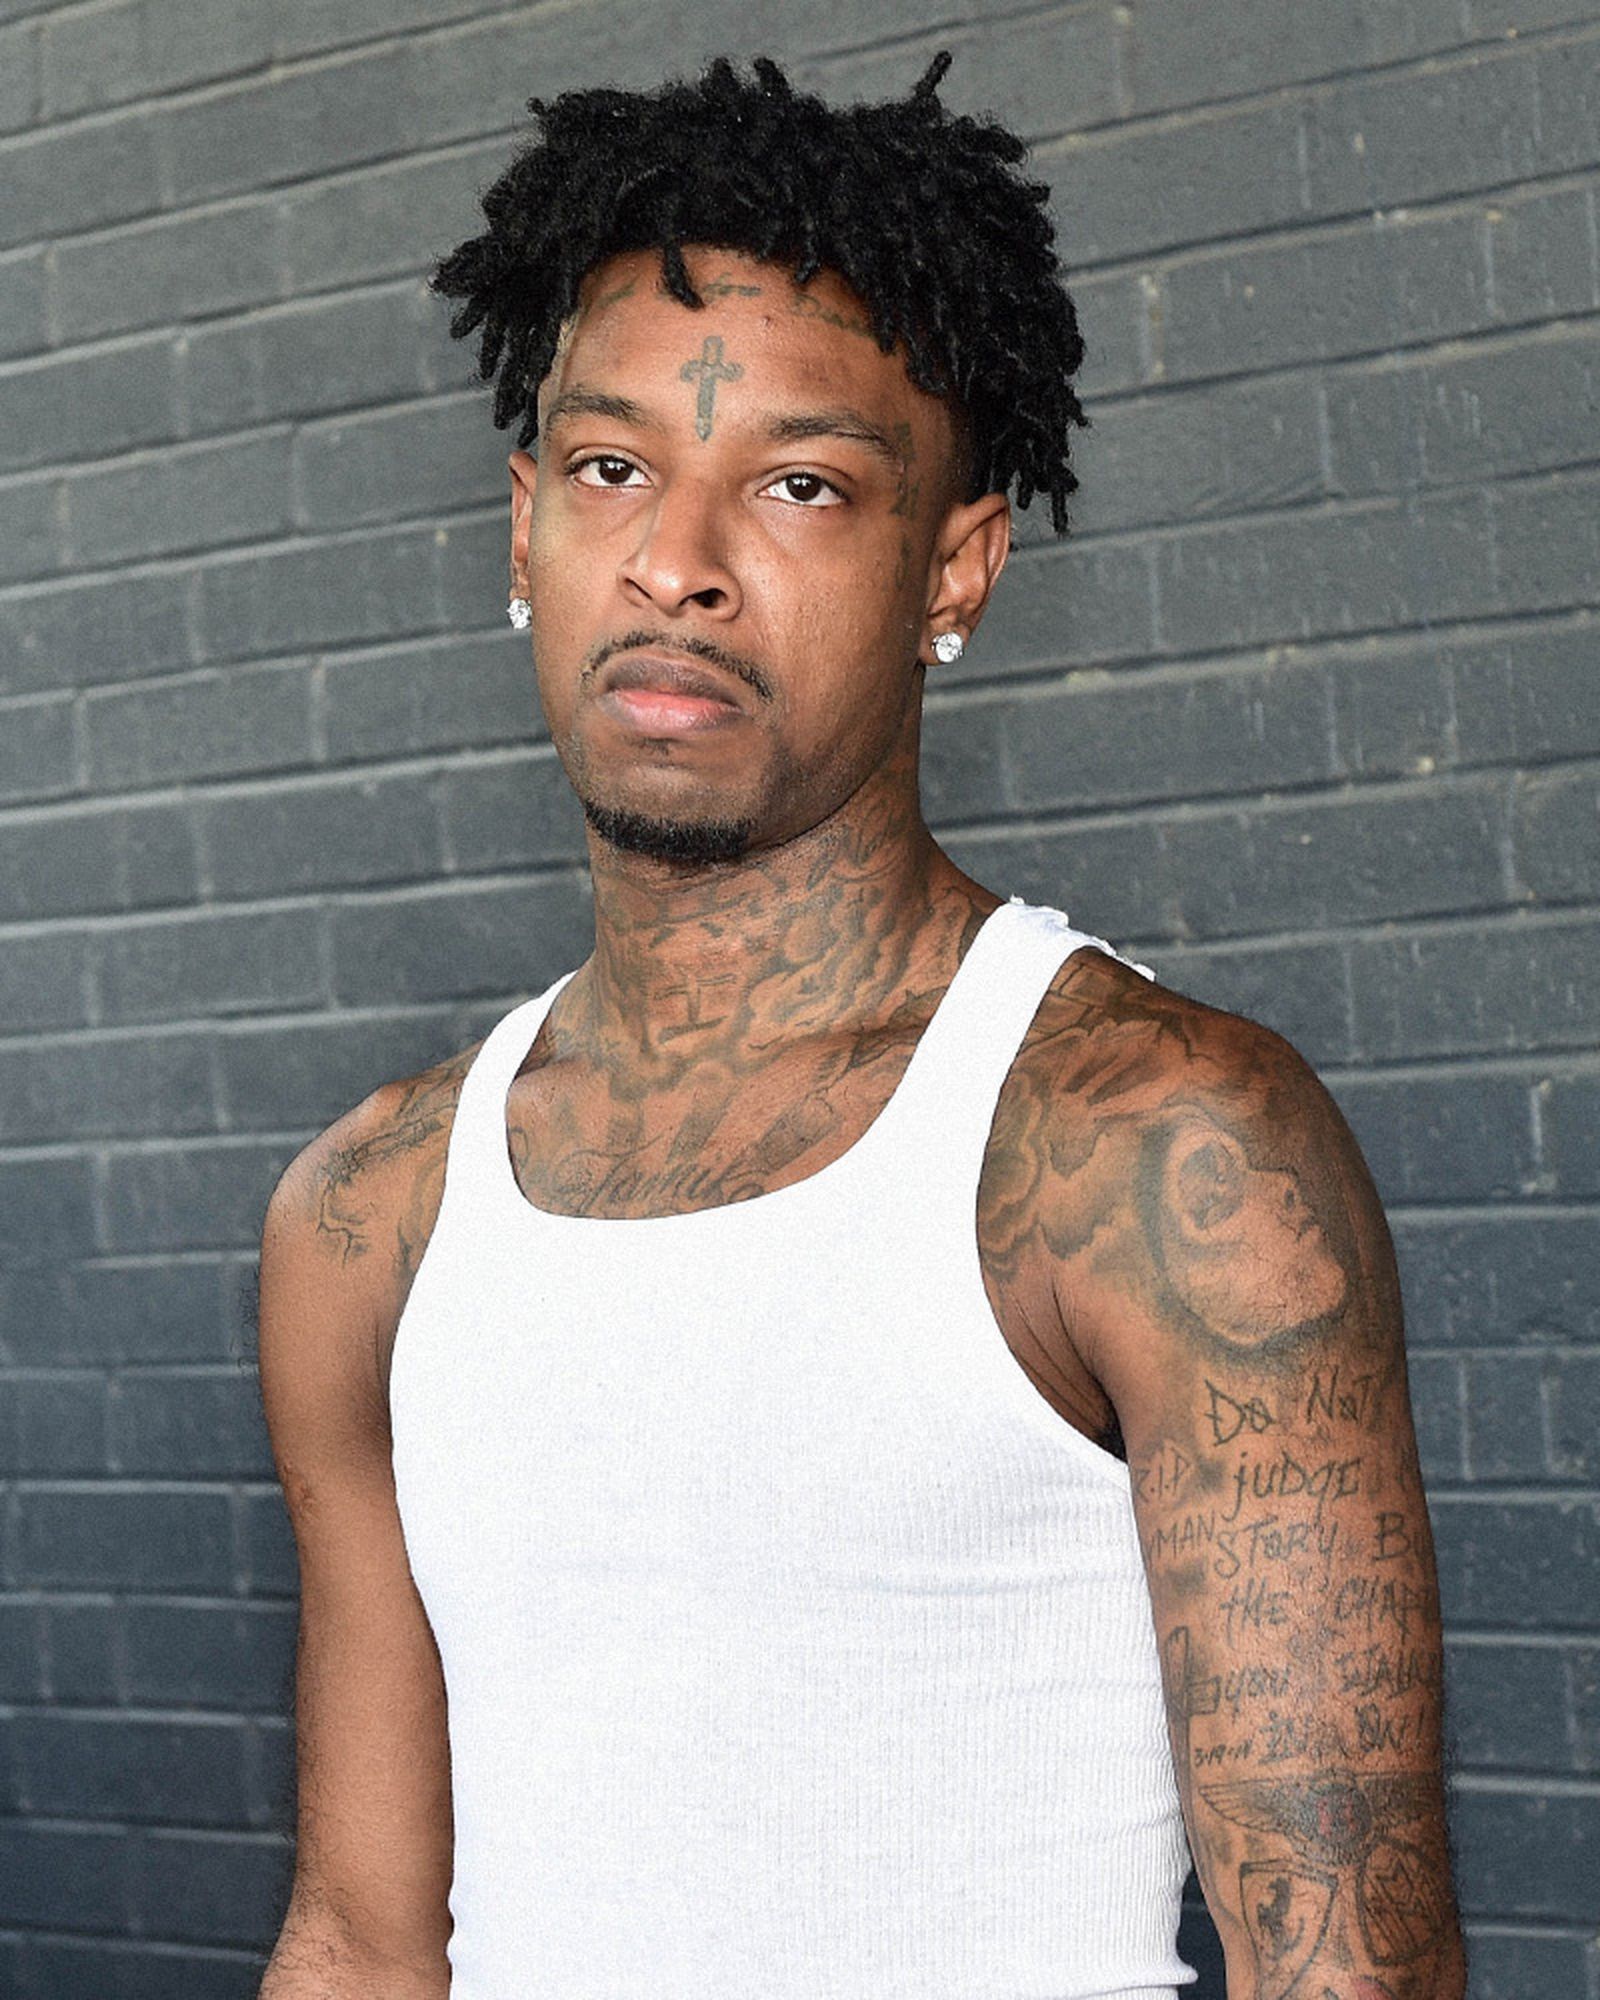 tattoos of rappers 21 Savage 50 cent Gucci Mane